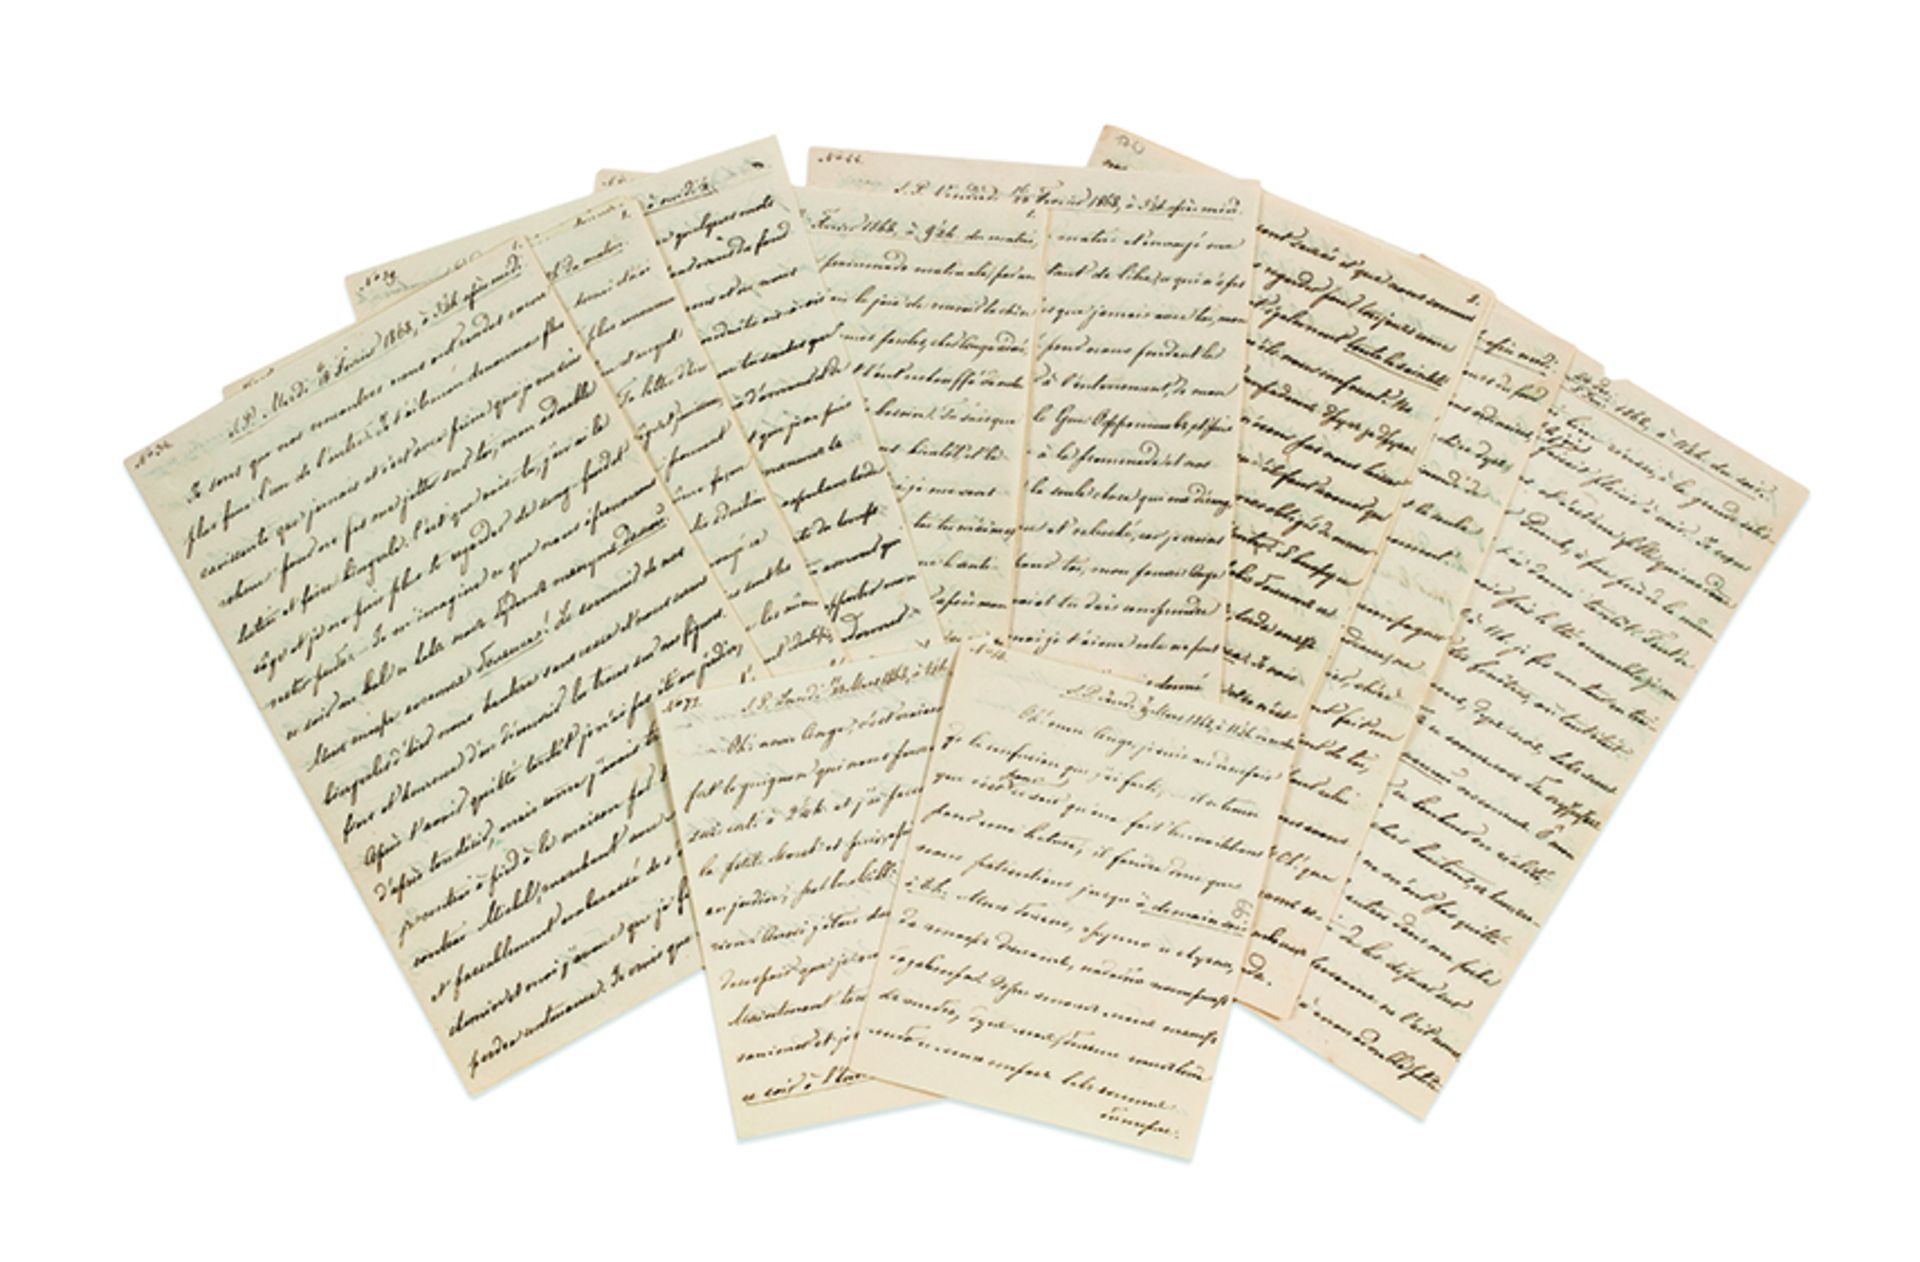 ALEXANDER II of Russia. 1818-1881. - Autograph letter. S [aint] P [ersbourg.], Friday [...]